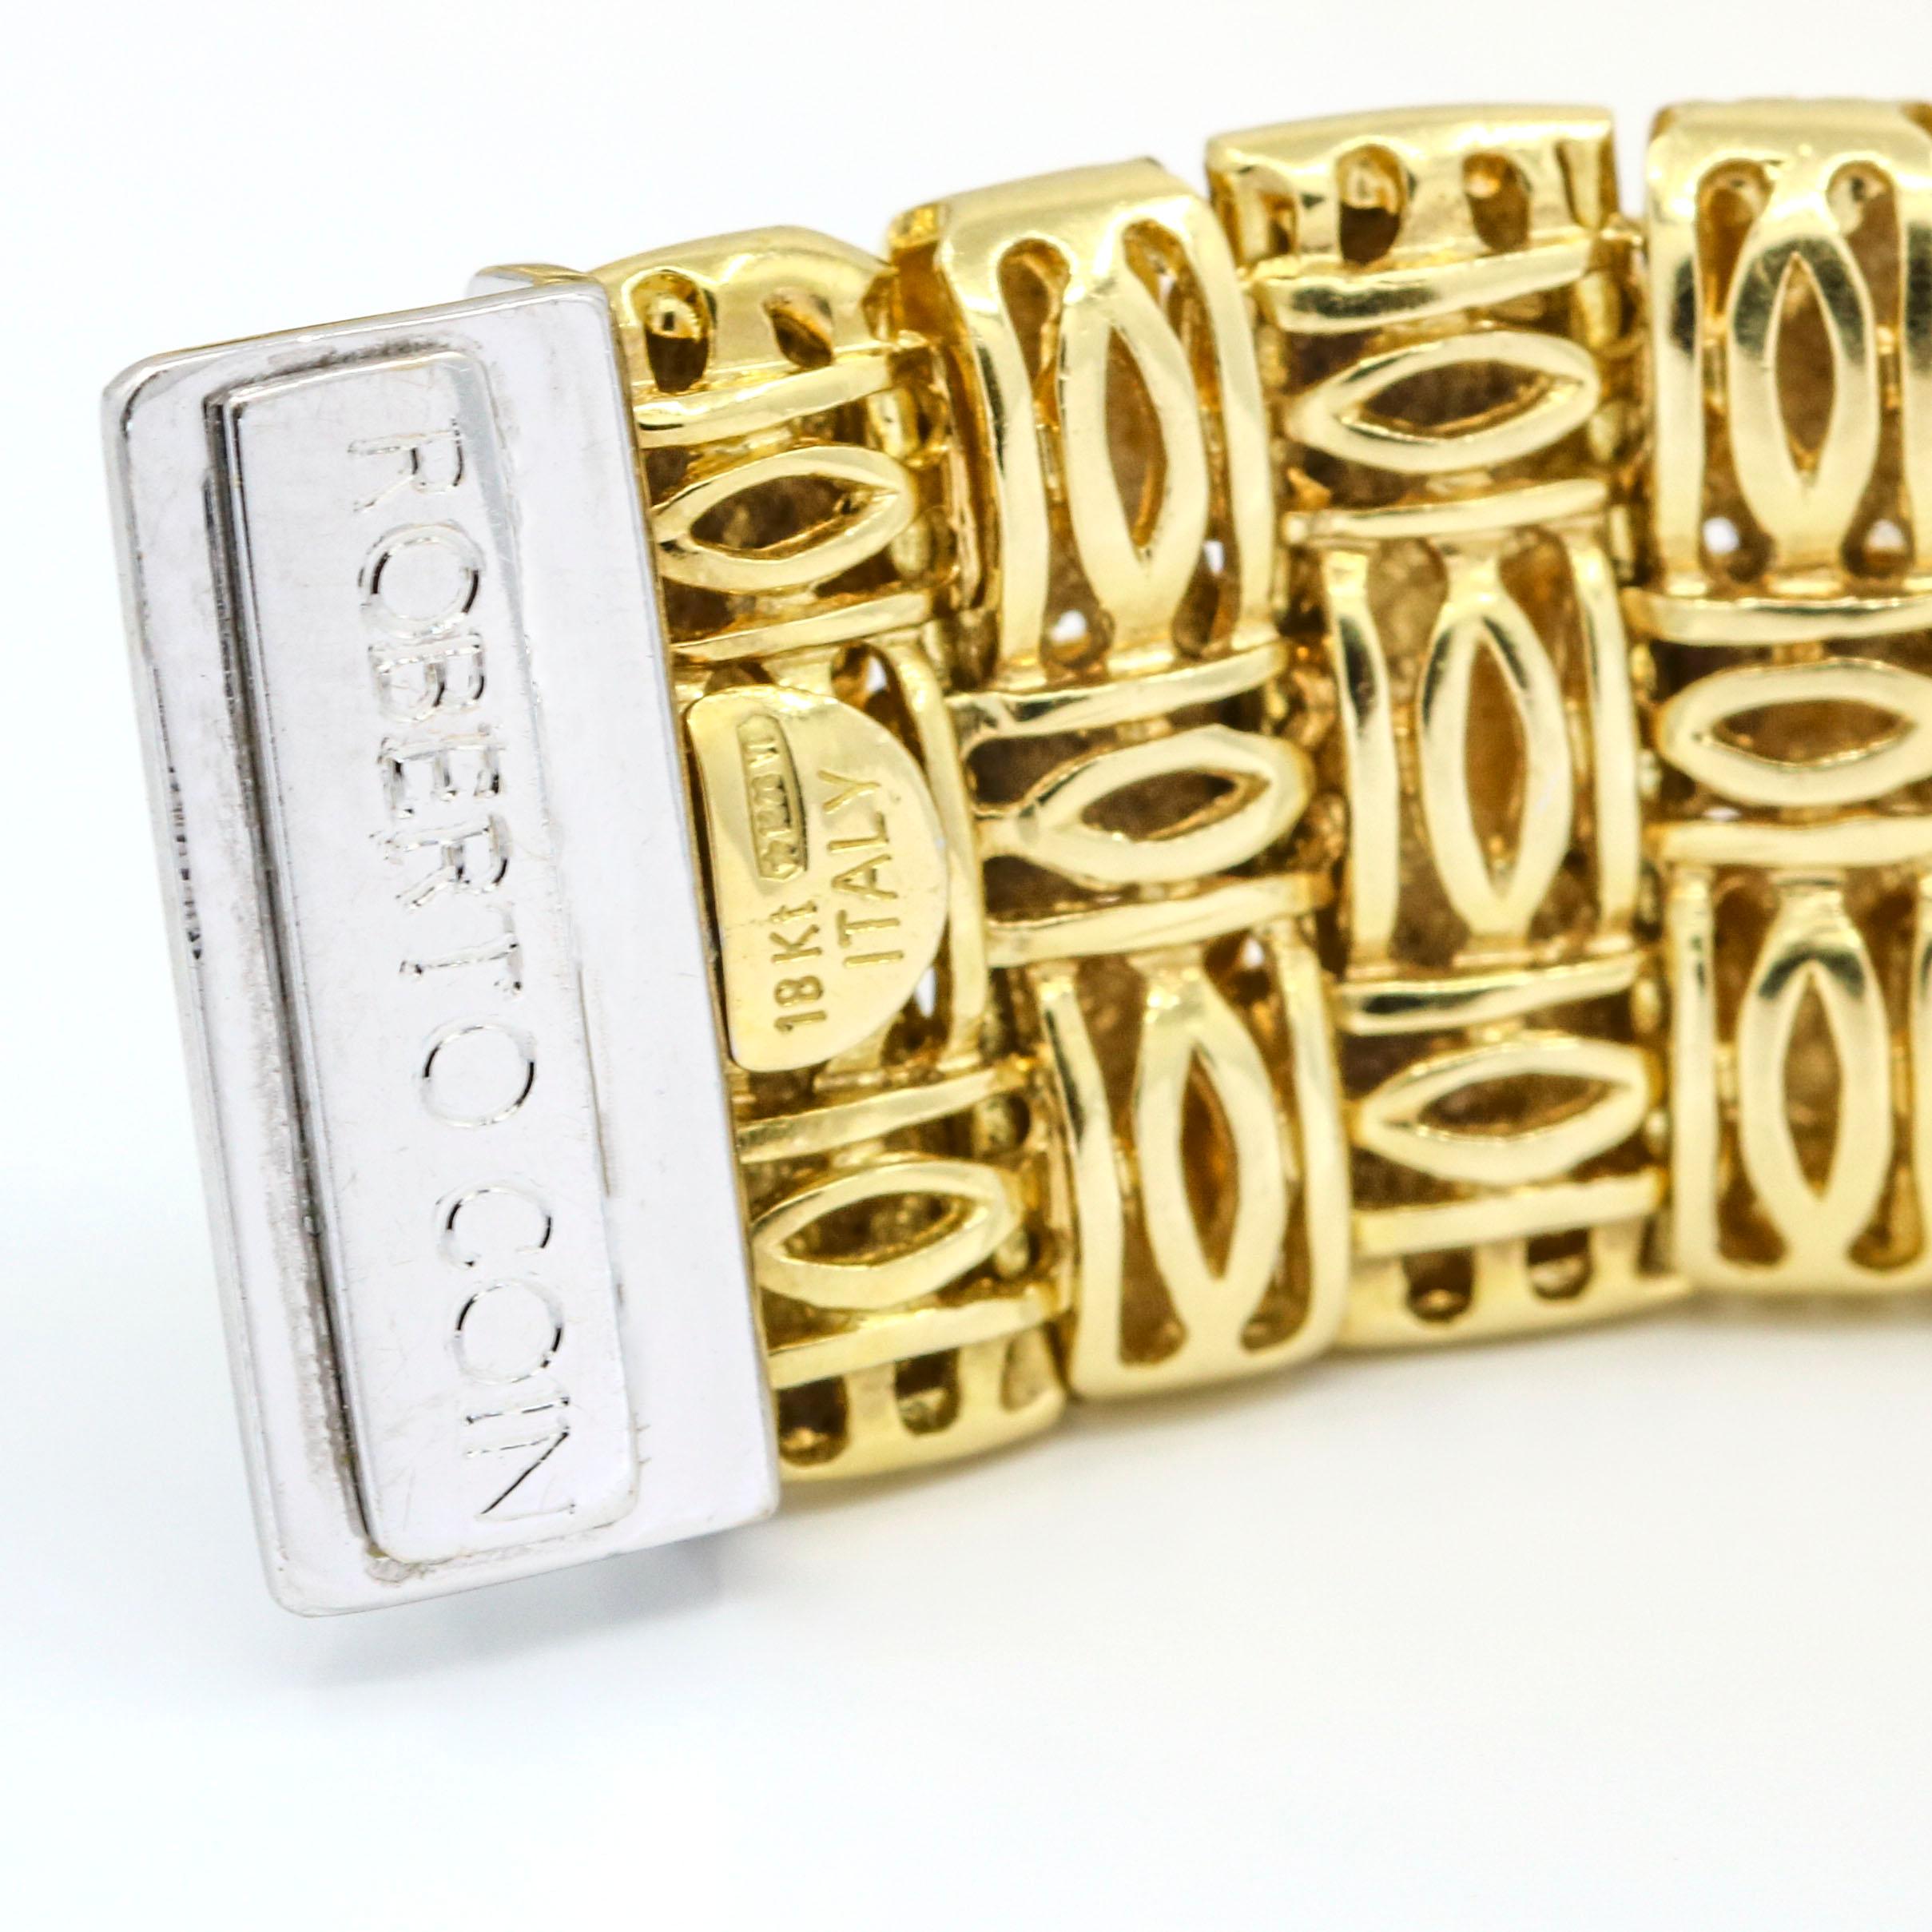 Roberto Coin 18 Karat Yellow Gold Appassionata Diamond Clasp 3-Row Bracelet In Excellent Condition For Sale In Fort Lauderdale, FL